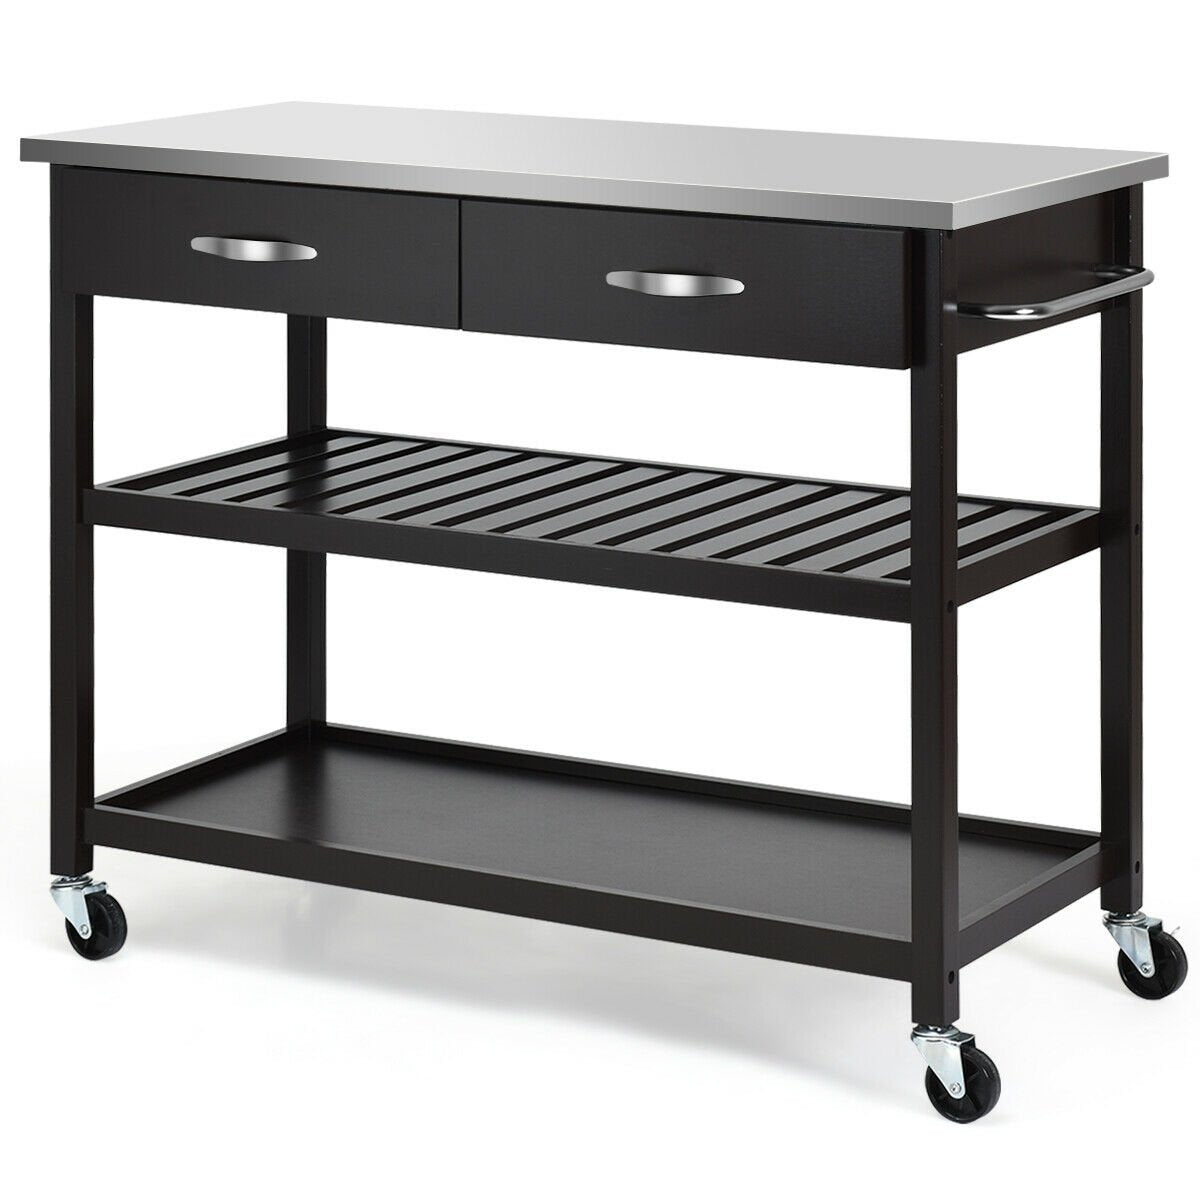 Stainless Steel Rolling Kitchen Island Trolley Cart-Brown